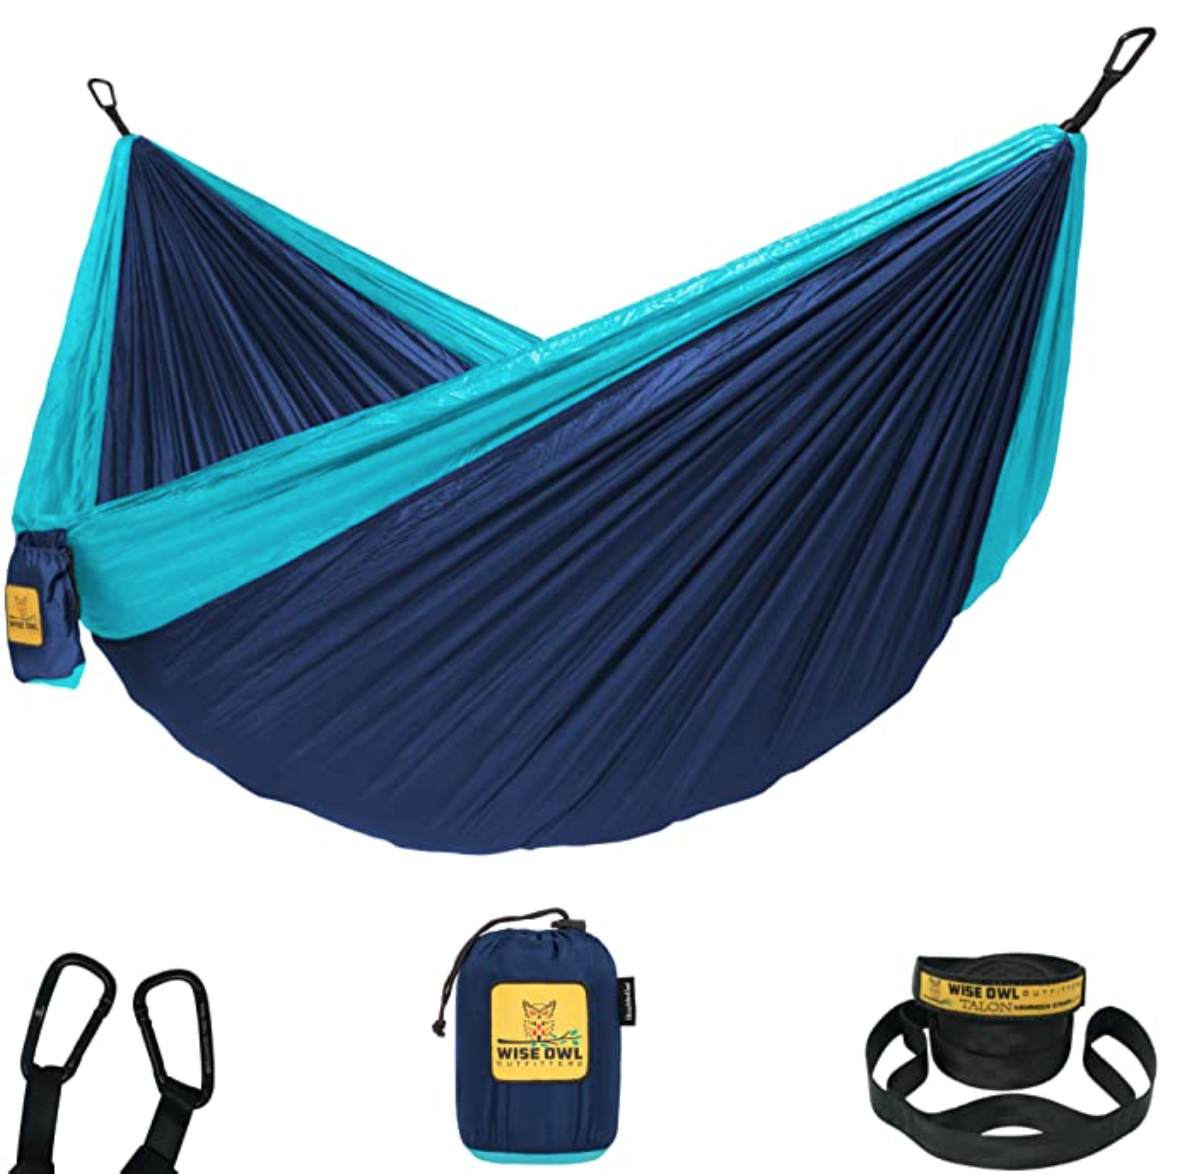 Wise Owl Outfitters Camping Hammocks - Portable Hammock for Outdoor, Indoor, Single & Double Use w/ Tree Straps - Backpacking Gear, Travel, and Camping Accessories